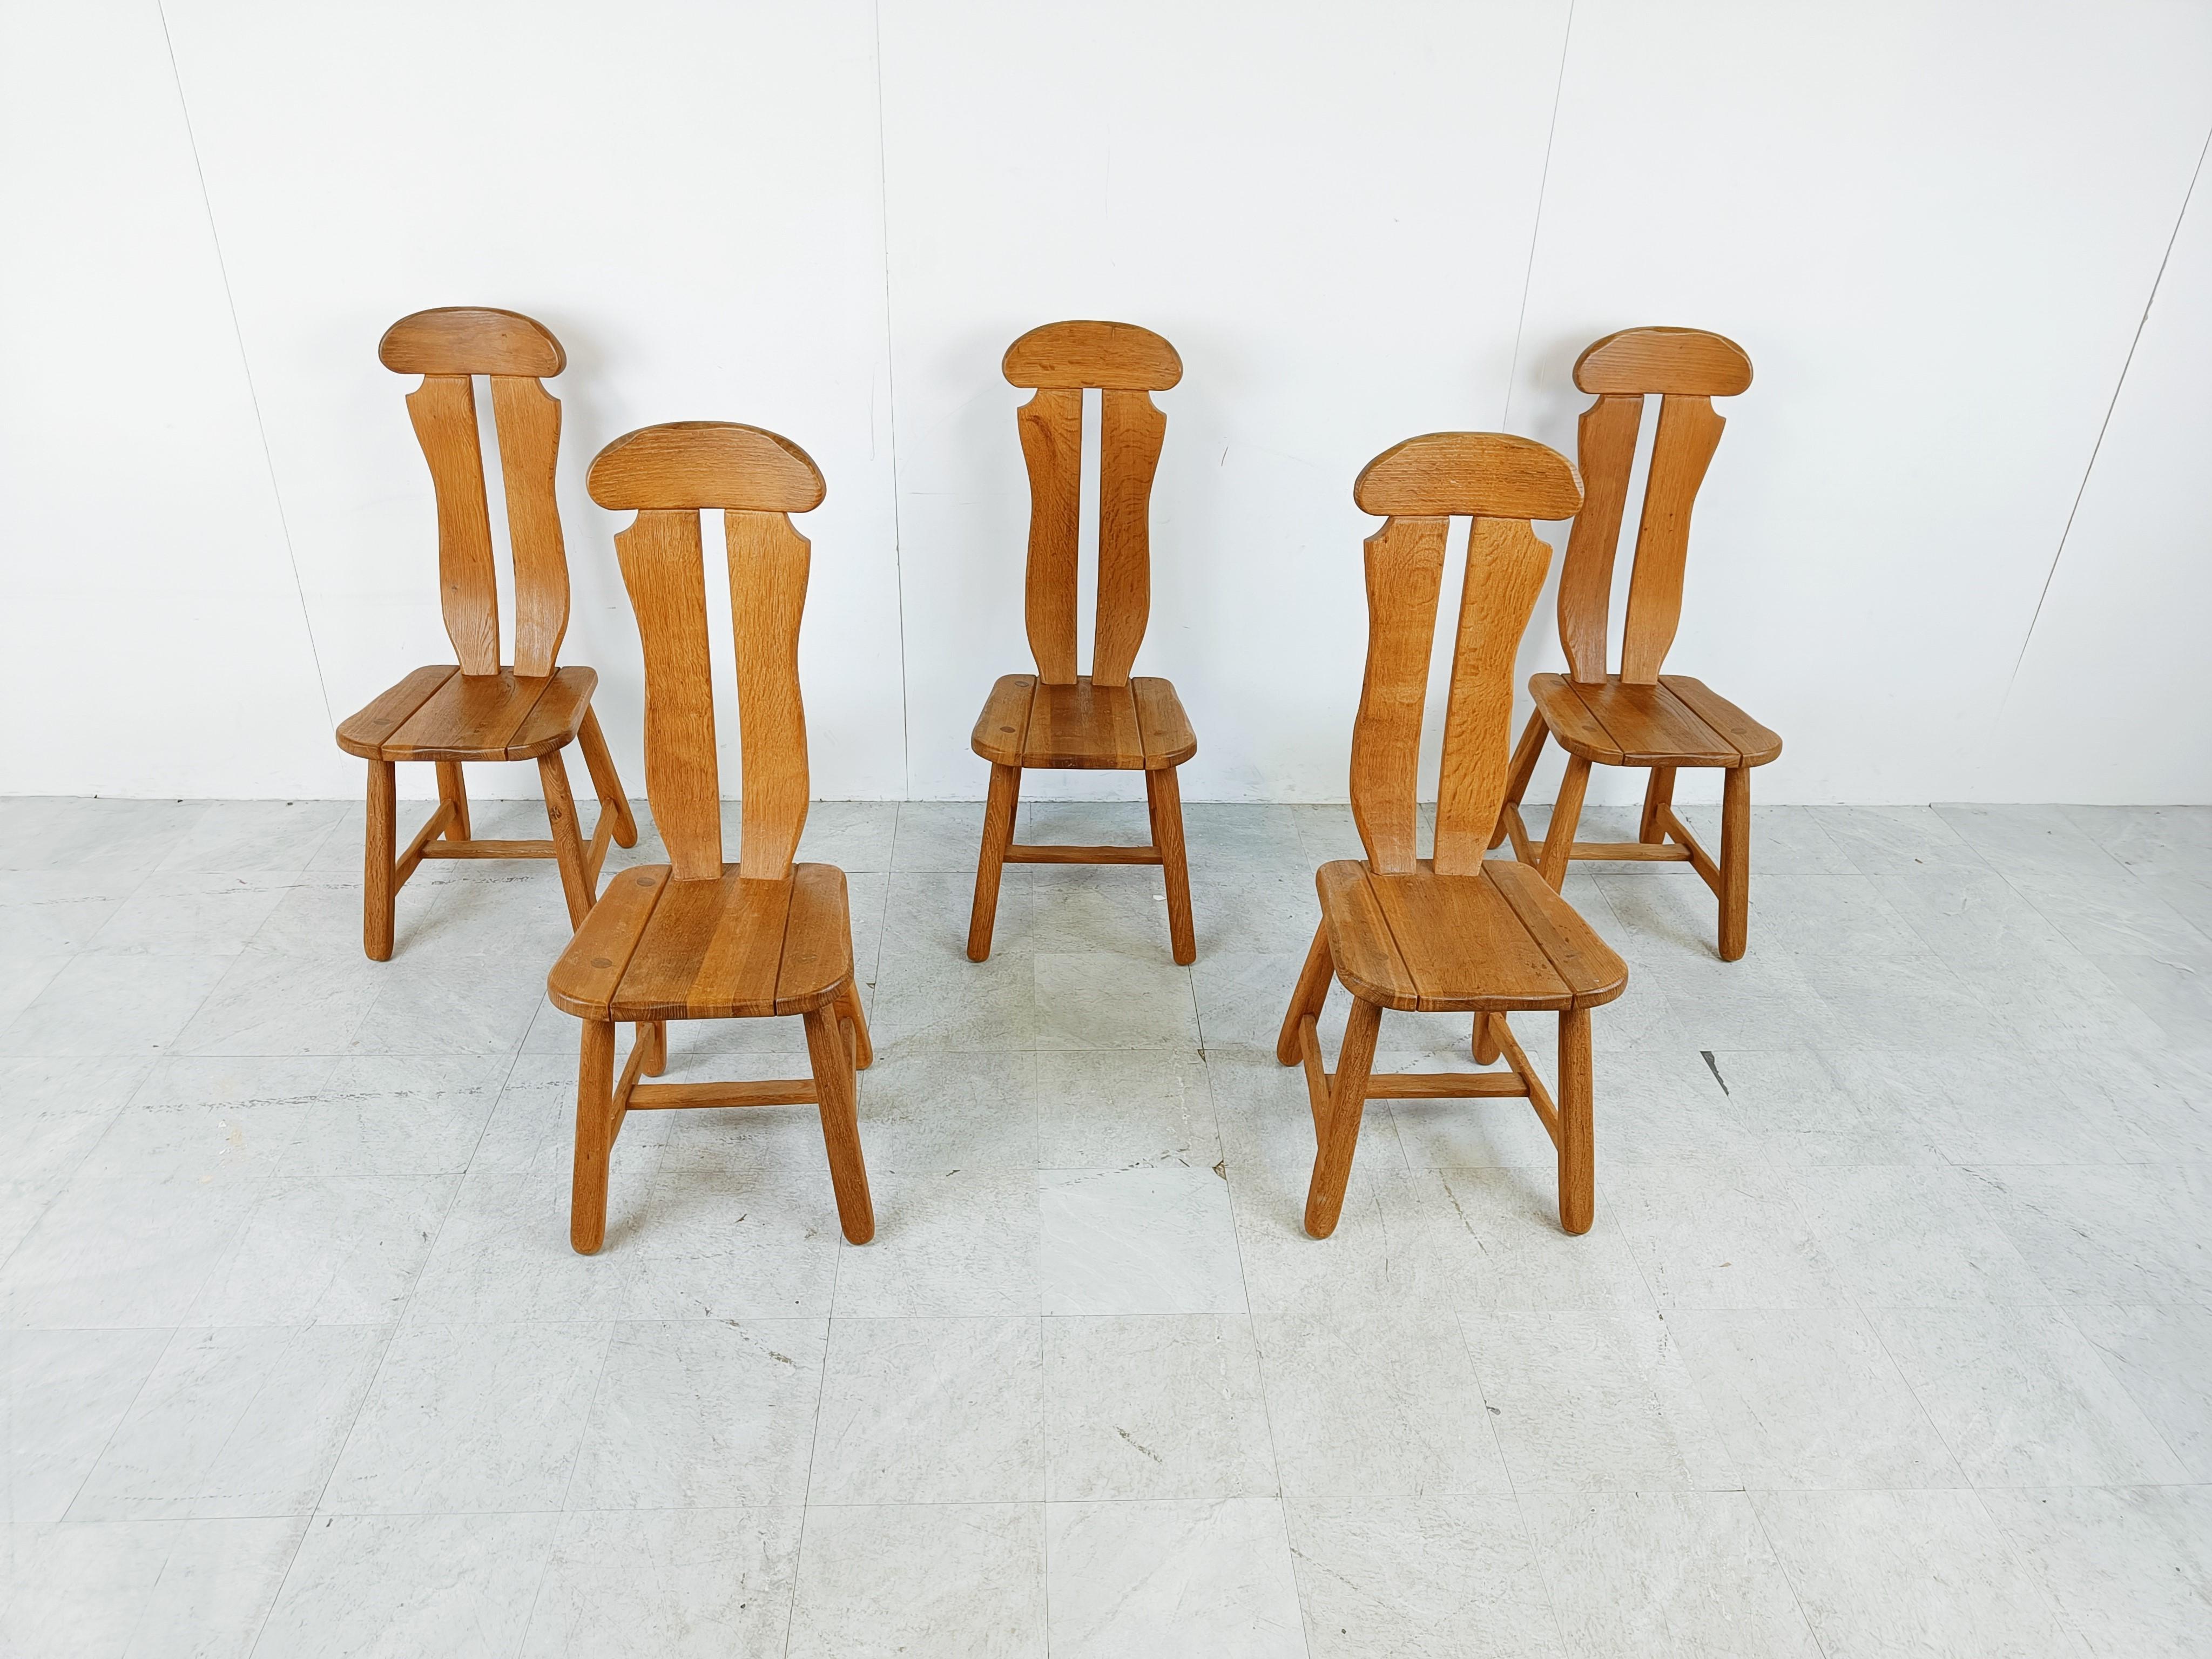 Sturdy and handcrafted dining chairs produced by Depuydt Kunstmeubelen in Belgium.

The chairs are made from solid oak.

Beautiful split backs with interlocking wooden pieces.

These chairs and table will last for ages.

Good